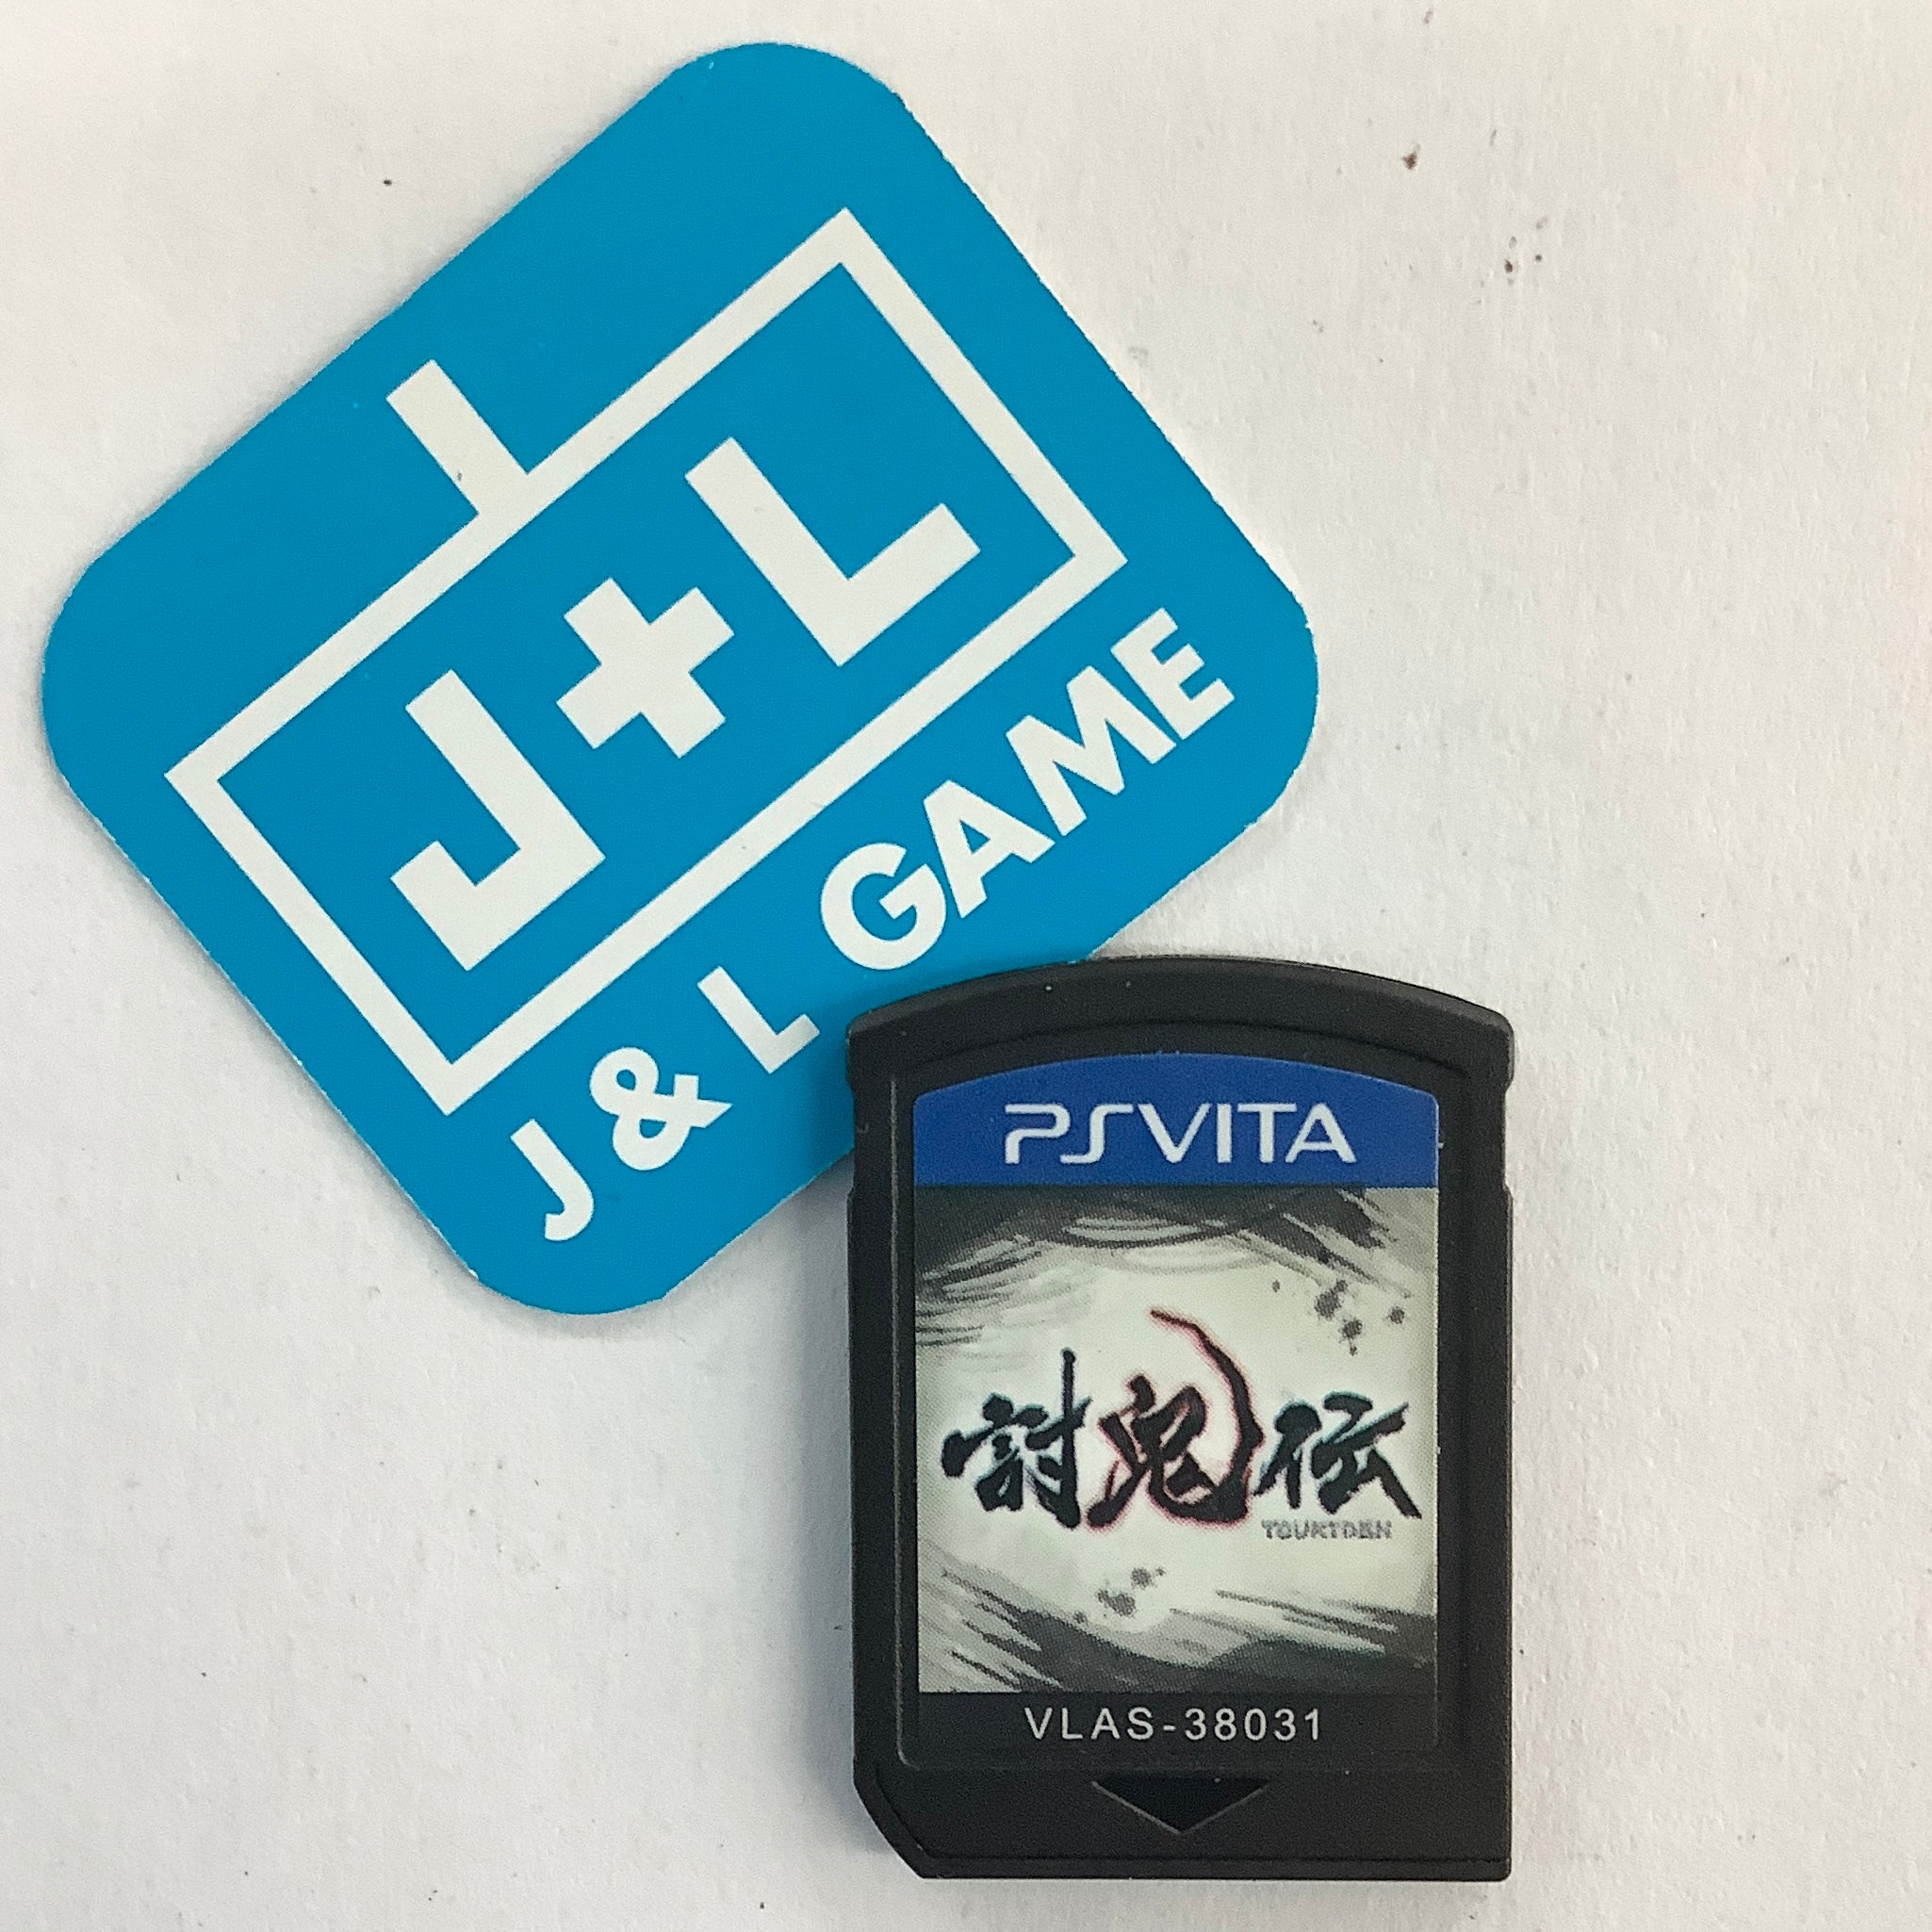 Toukiden (Japanese Sub) - (PSV) PlayStation Vita [Pre-Owned] (Asia Import) Video Games Koei Tecmo Games   